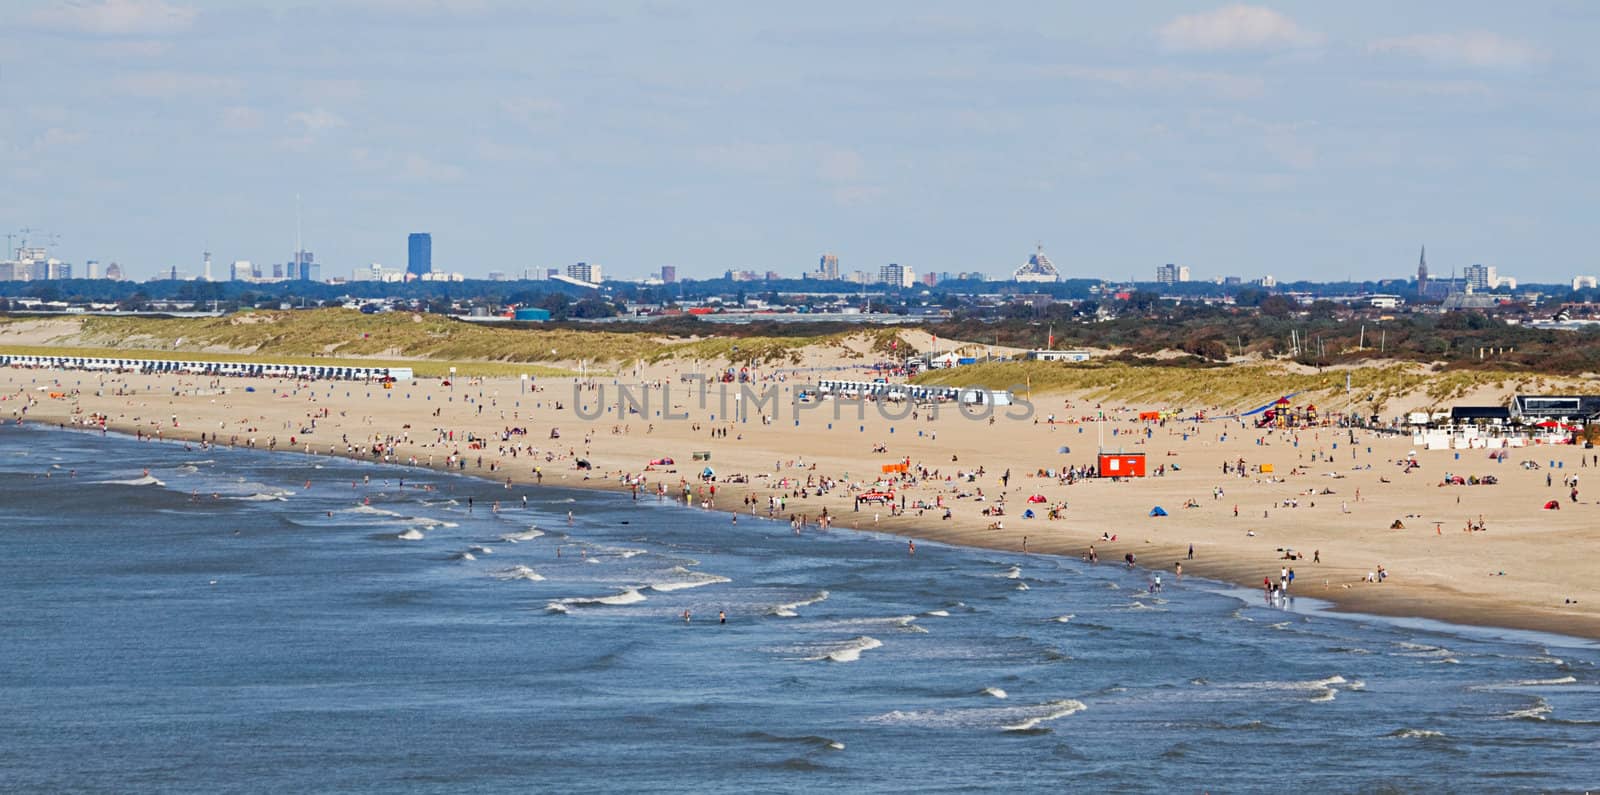 View to the Dutch coast from the seaside by Colette